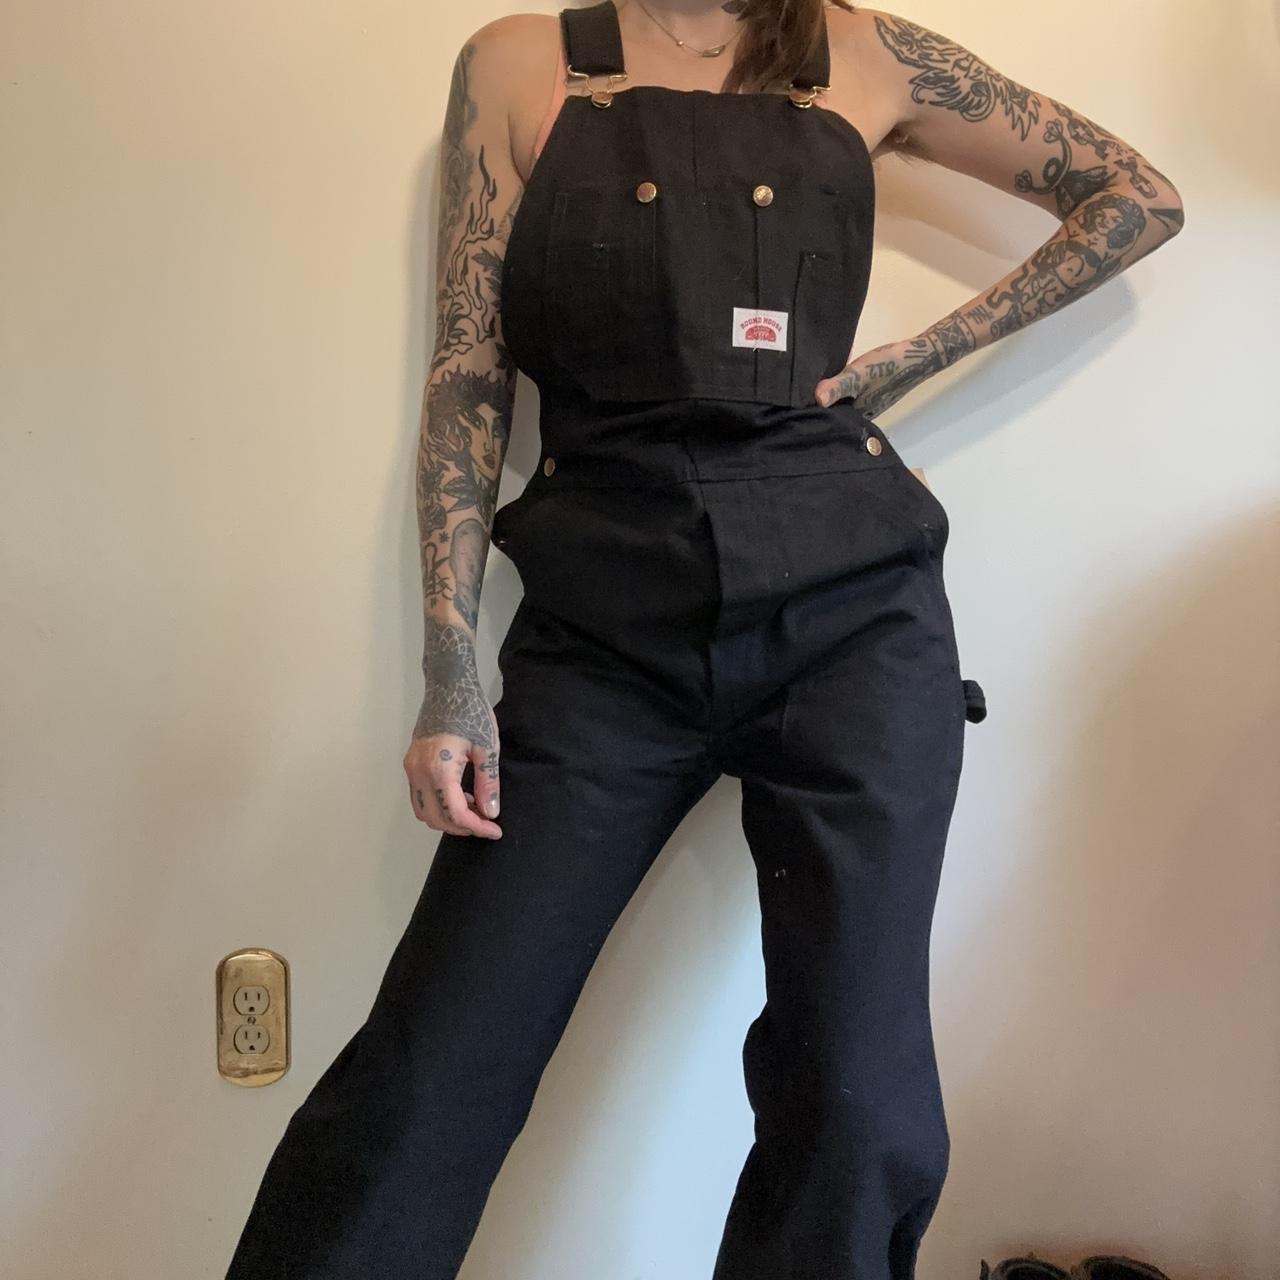 Roundhouse overalls! 🖤🌸 ABOUT THE... - Depop